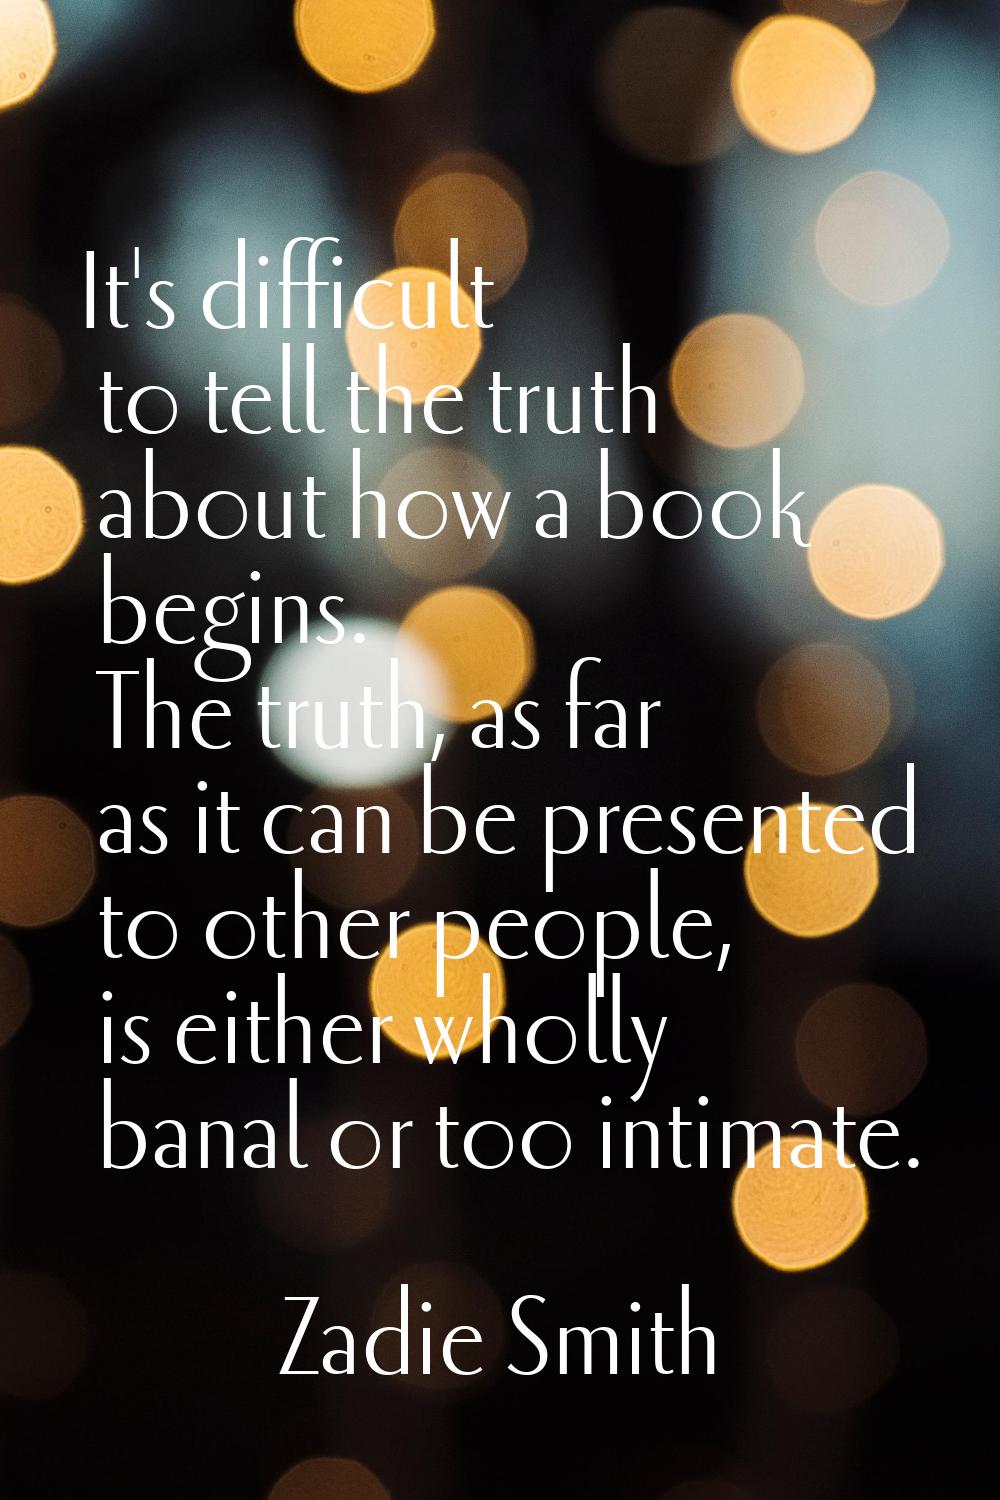 It's difficult to tell the truth about how a book begins. The truth, as far as it can be presented 